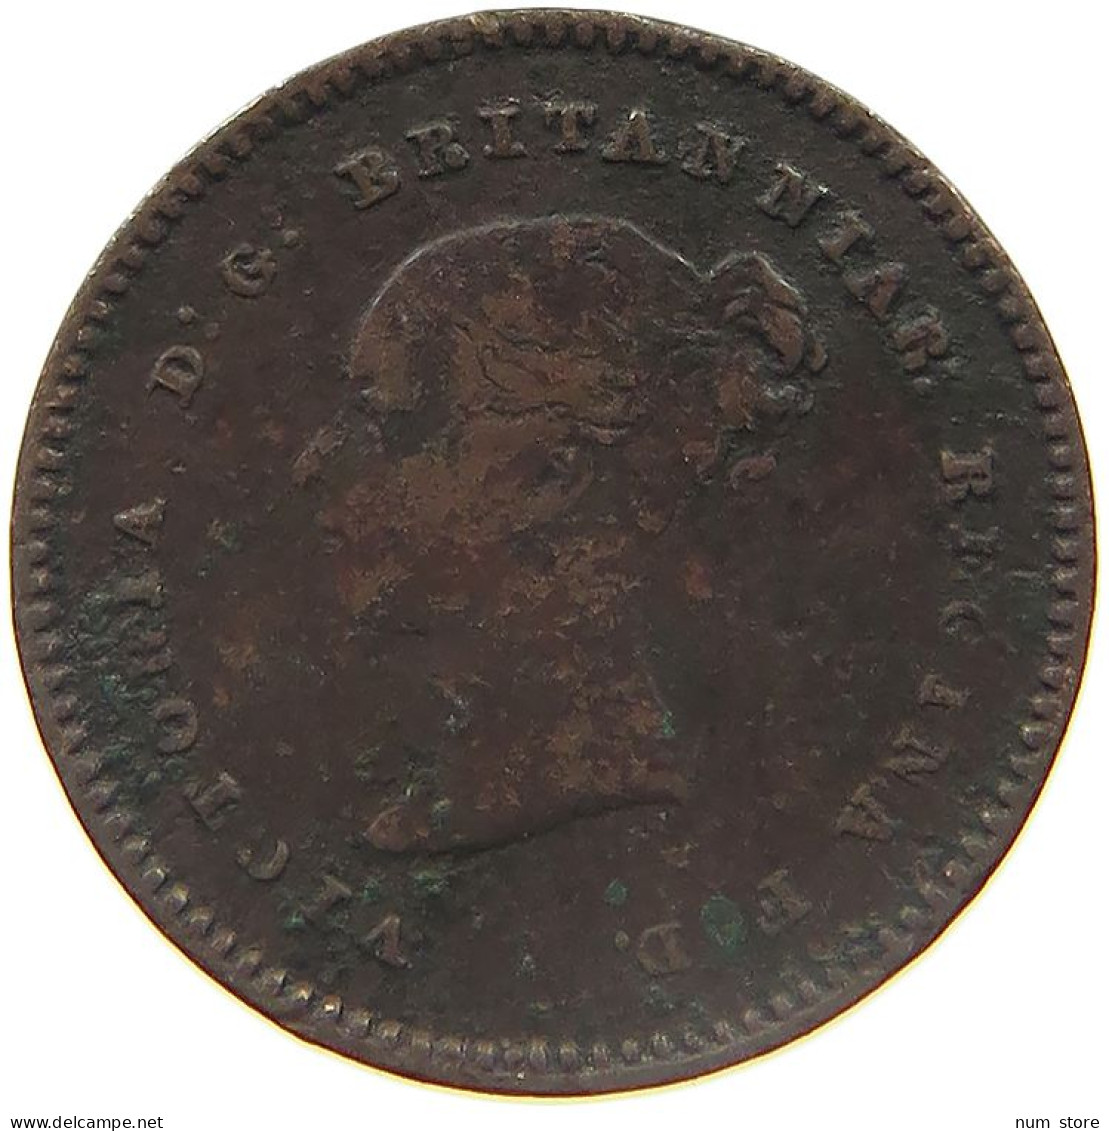 GREAT BRITAIN 1/4 QUARTER FARTHING 1851 VICTORIA 1837-1901 #MA 022990 - A. 1/4 - 1/3 - 1/2 Farthing